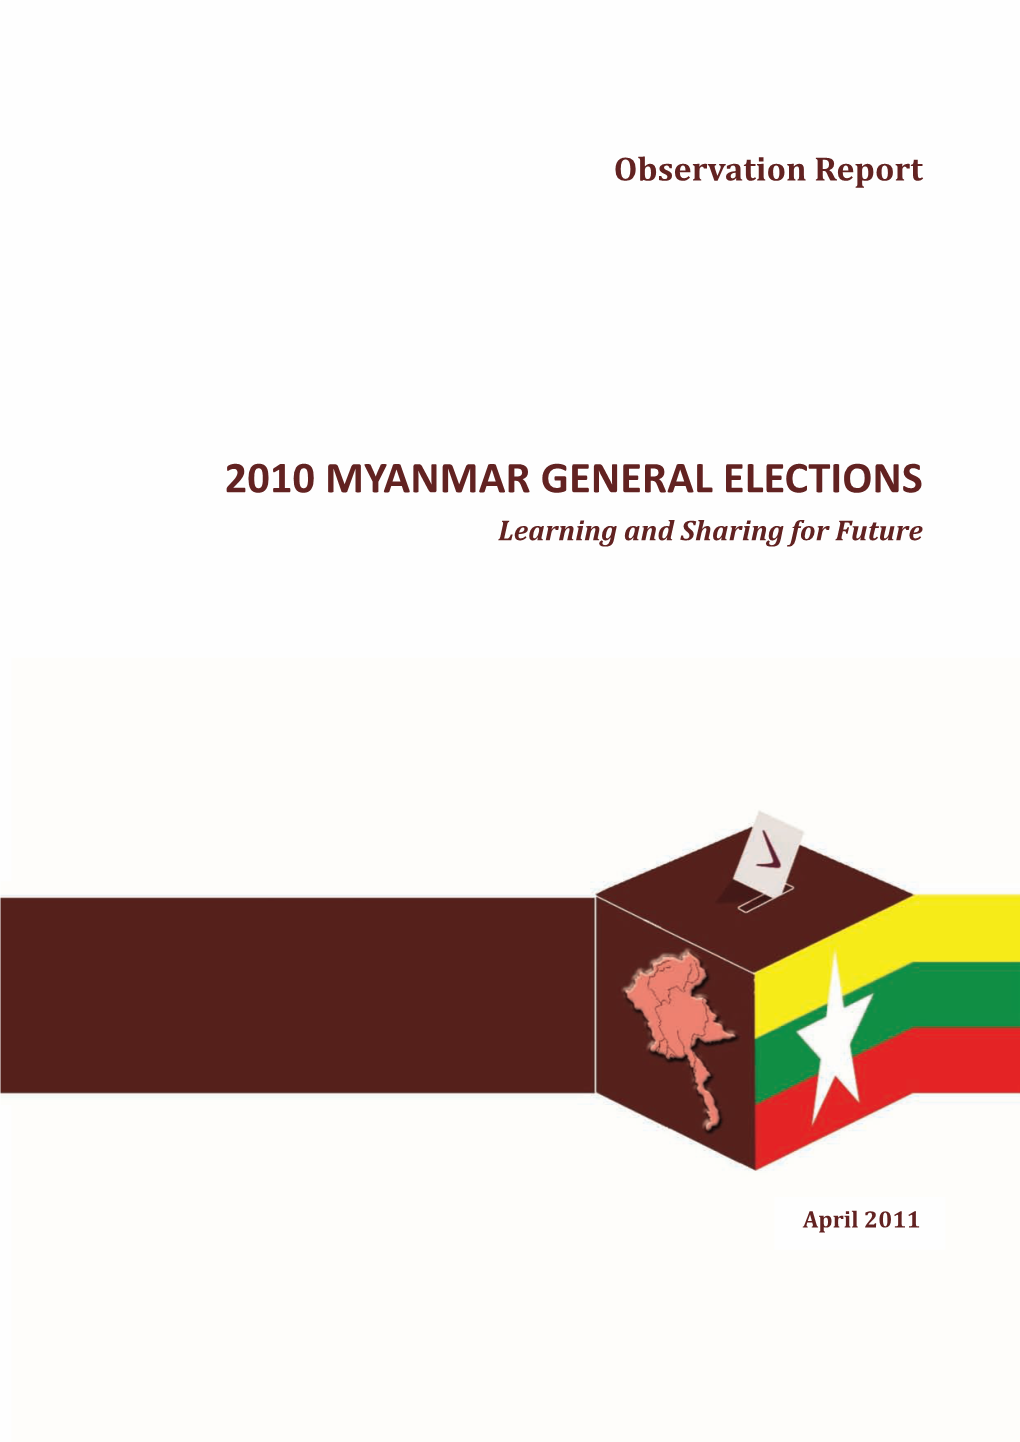 2010 MYANMAR GENERAL ELECTIONS Learning and Sharing for Future